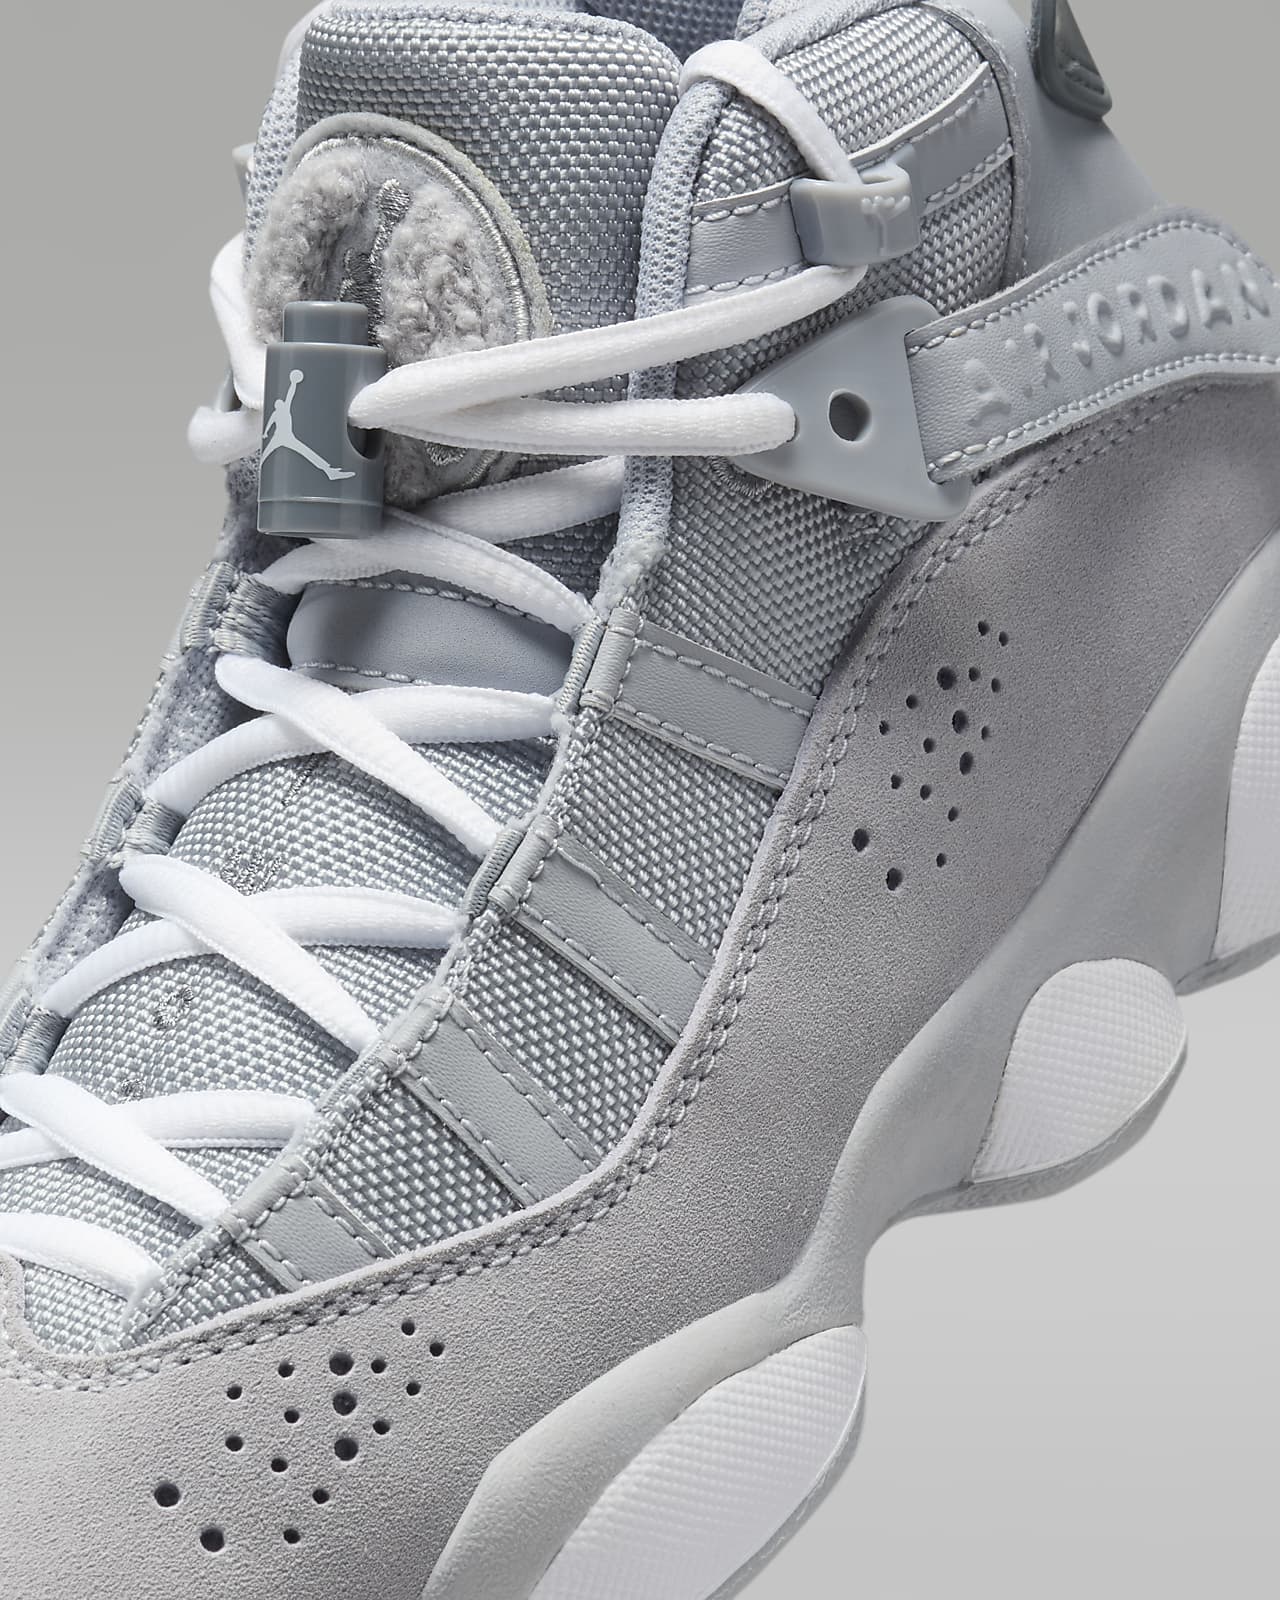 Official Images // Jordan 6 Rings “Altitude” | House of Heat°